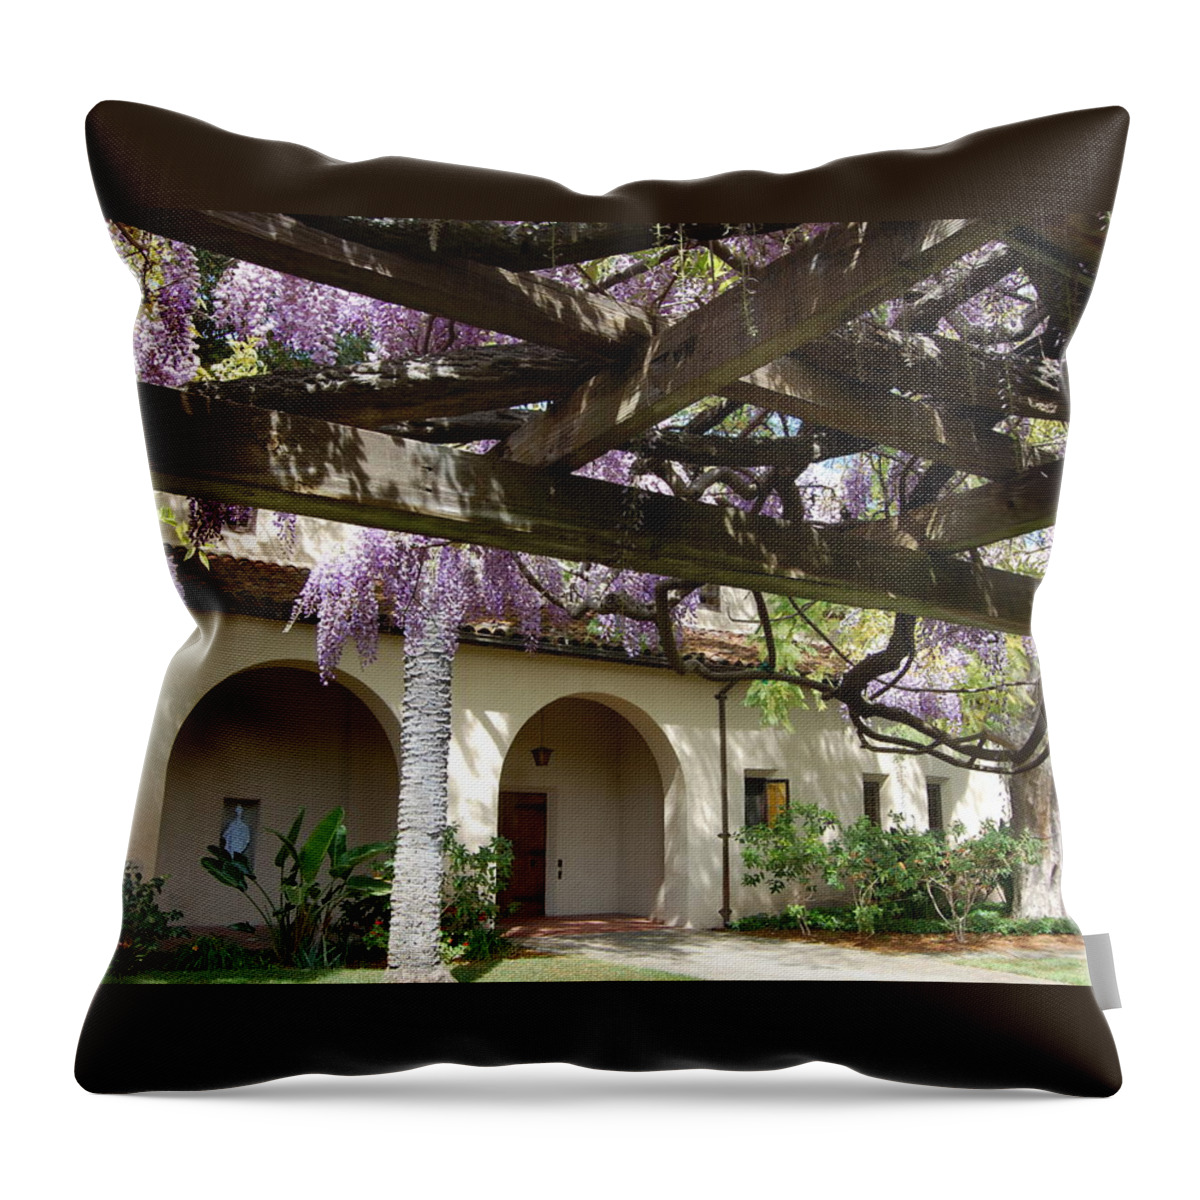 Wisteria Throw Pillow featuring the photograph Wisteria Arbor by Carolyn Donnell